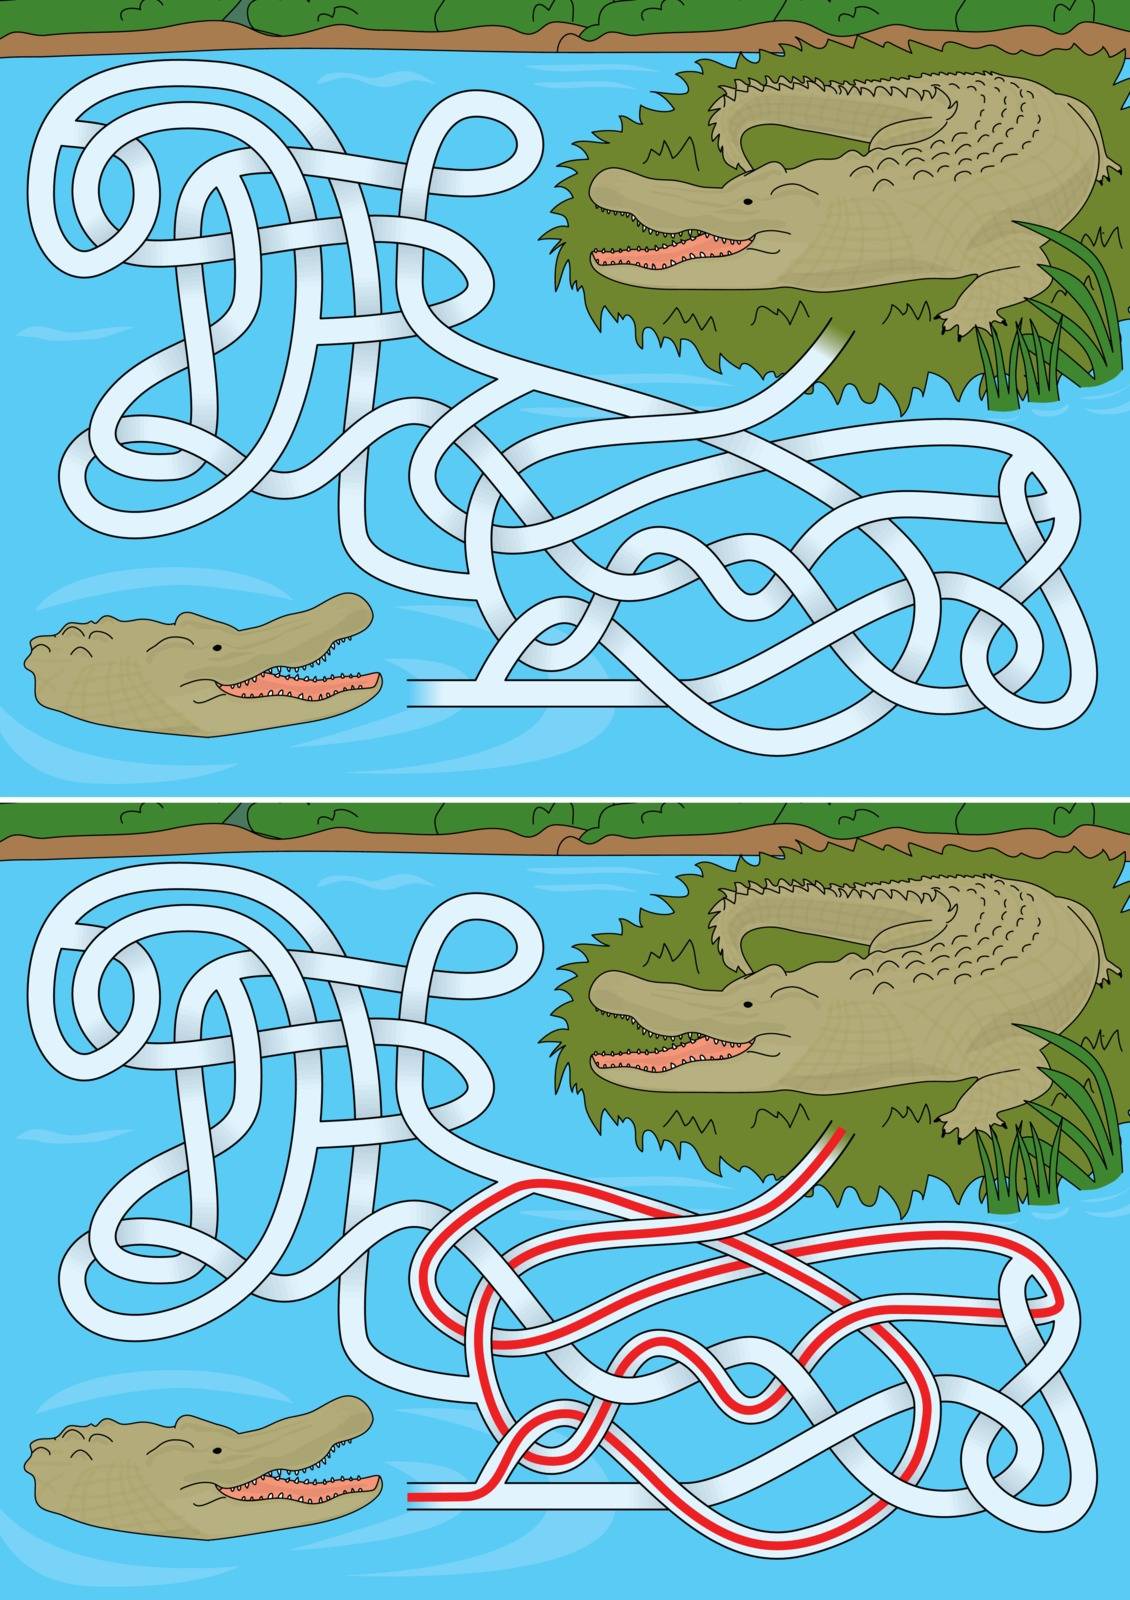 Crocodile maze for kids with a solution